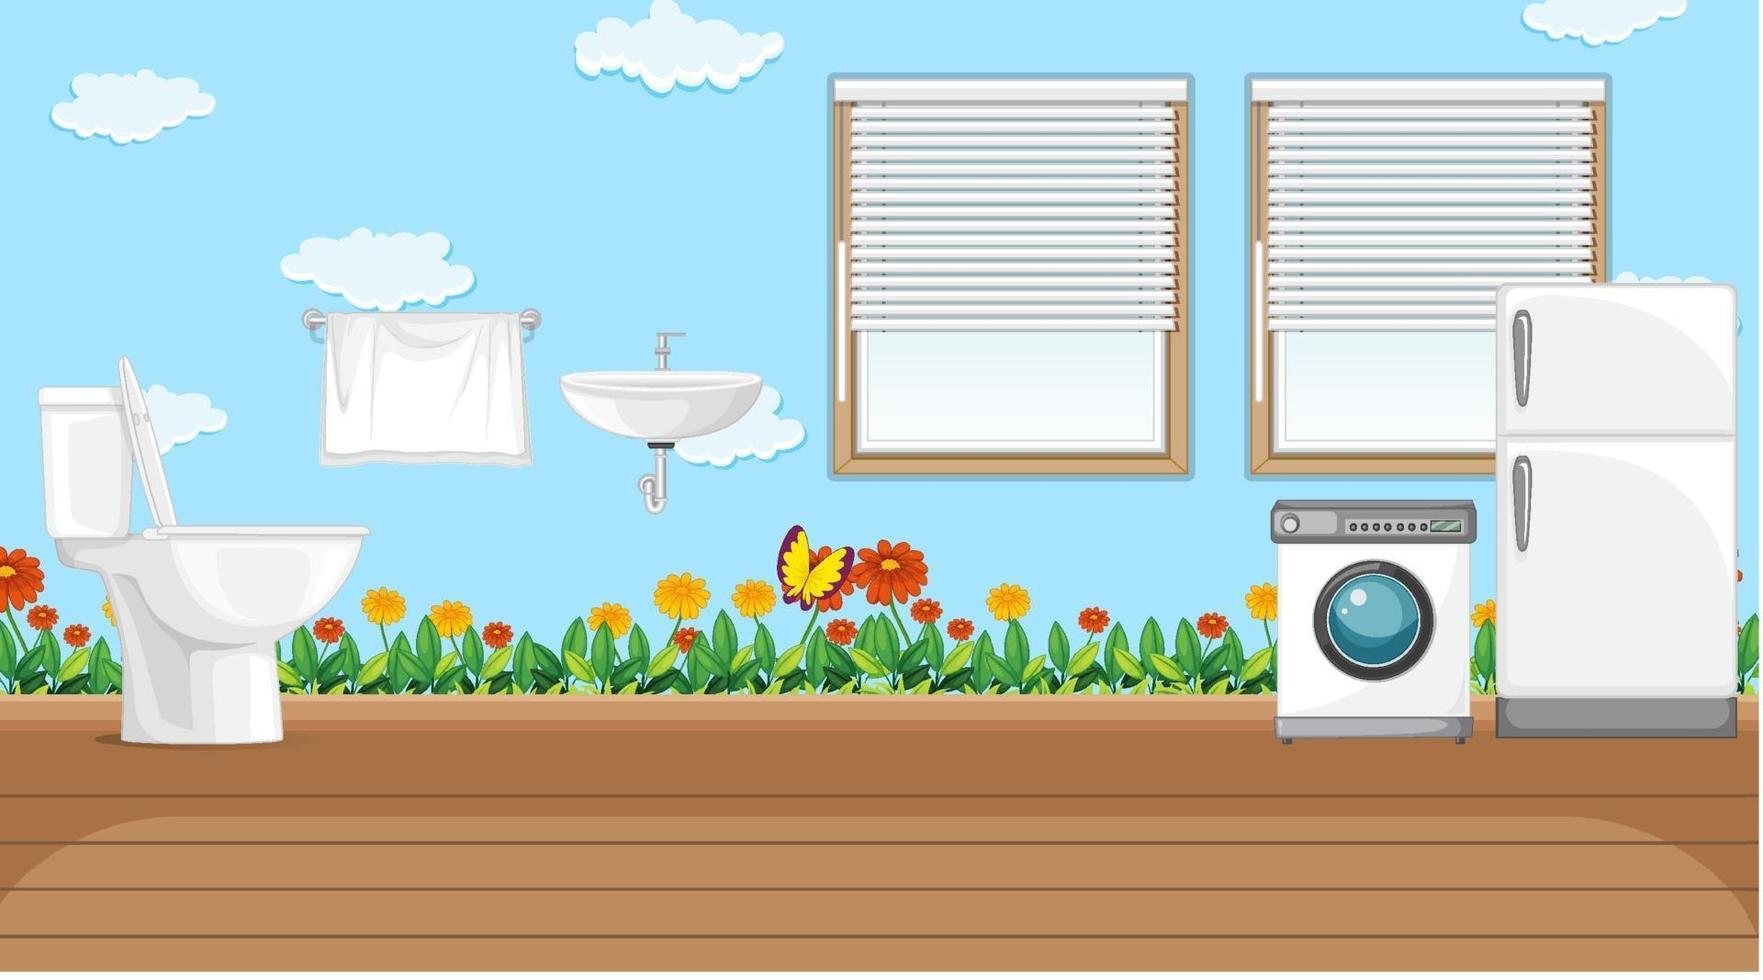 Scene with washing machine and refrigerator in the toilet vector